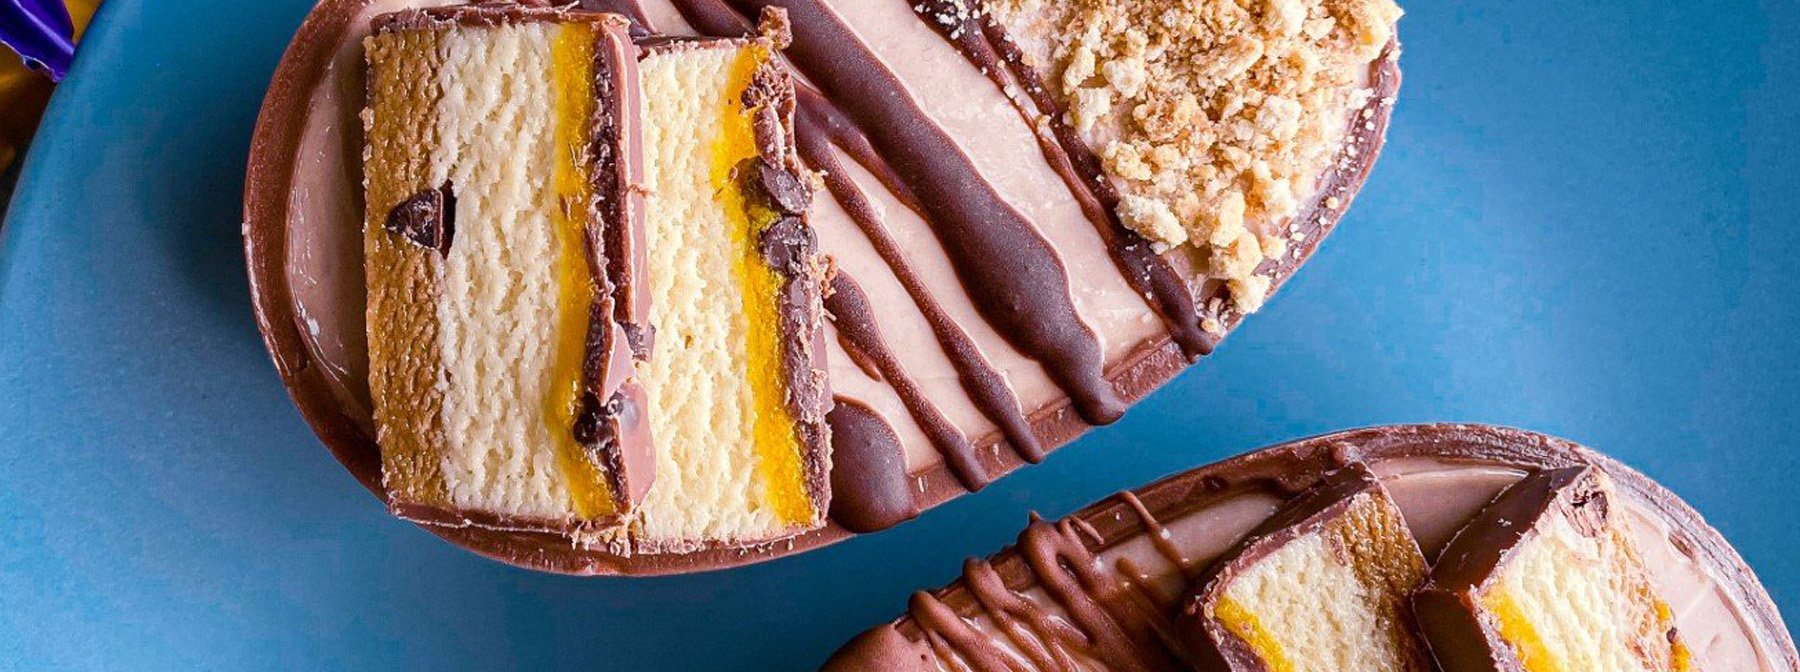 5 High-Protein Easter Recipes For The Long Weekend